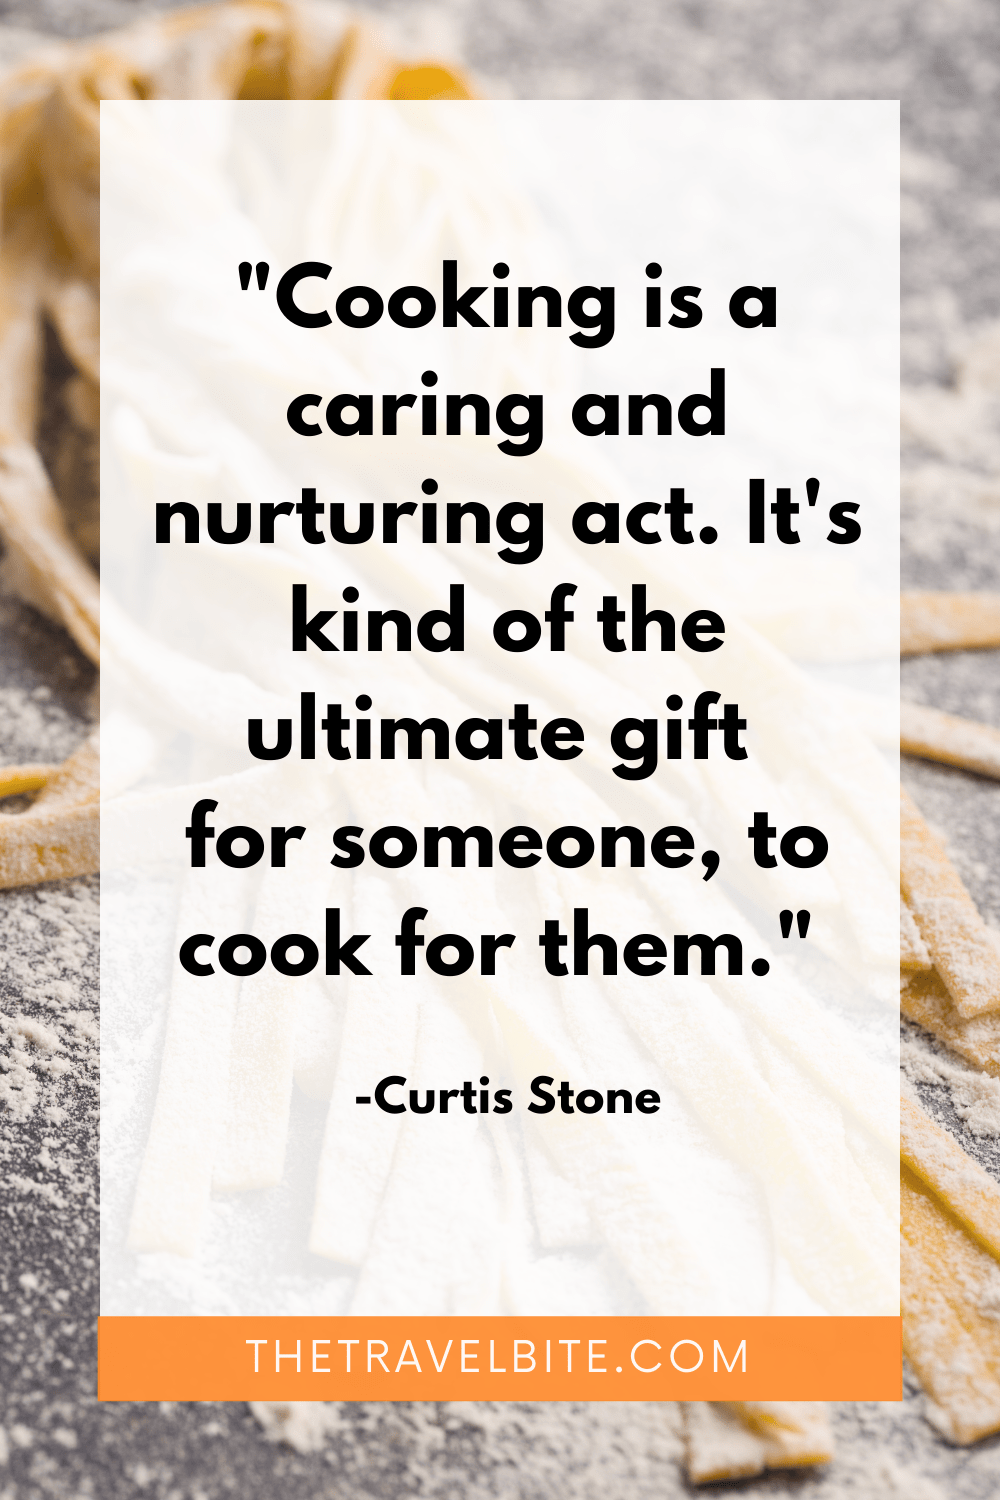 Food Quotes | 100+ Quotes About Food – The Travel Bite